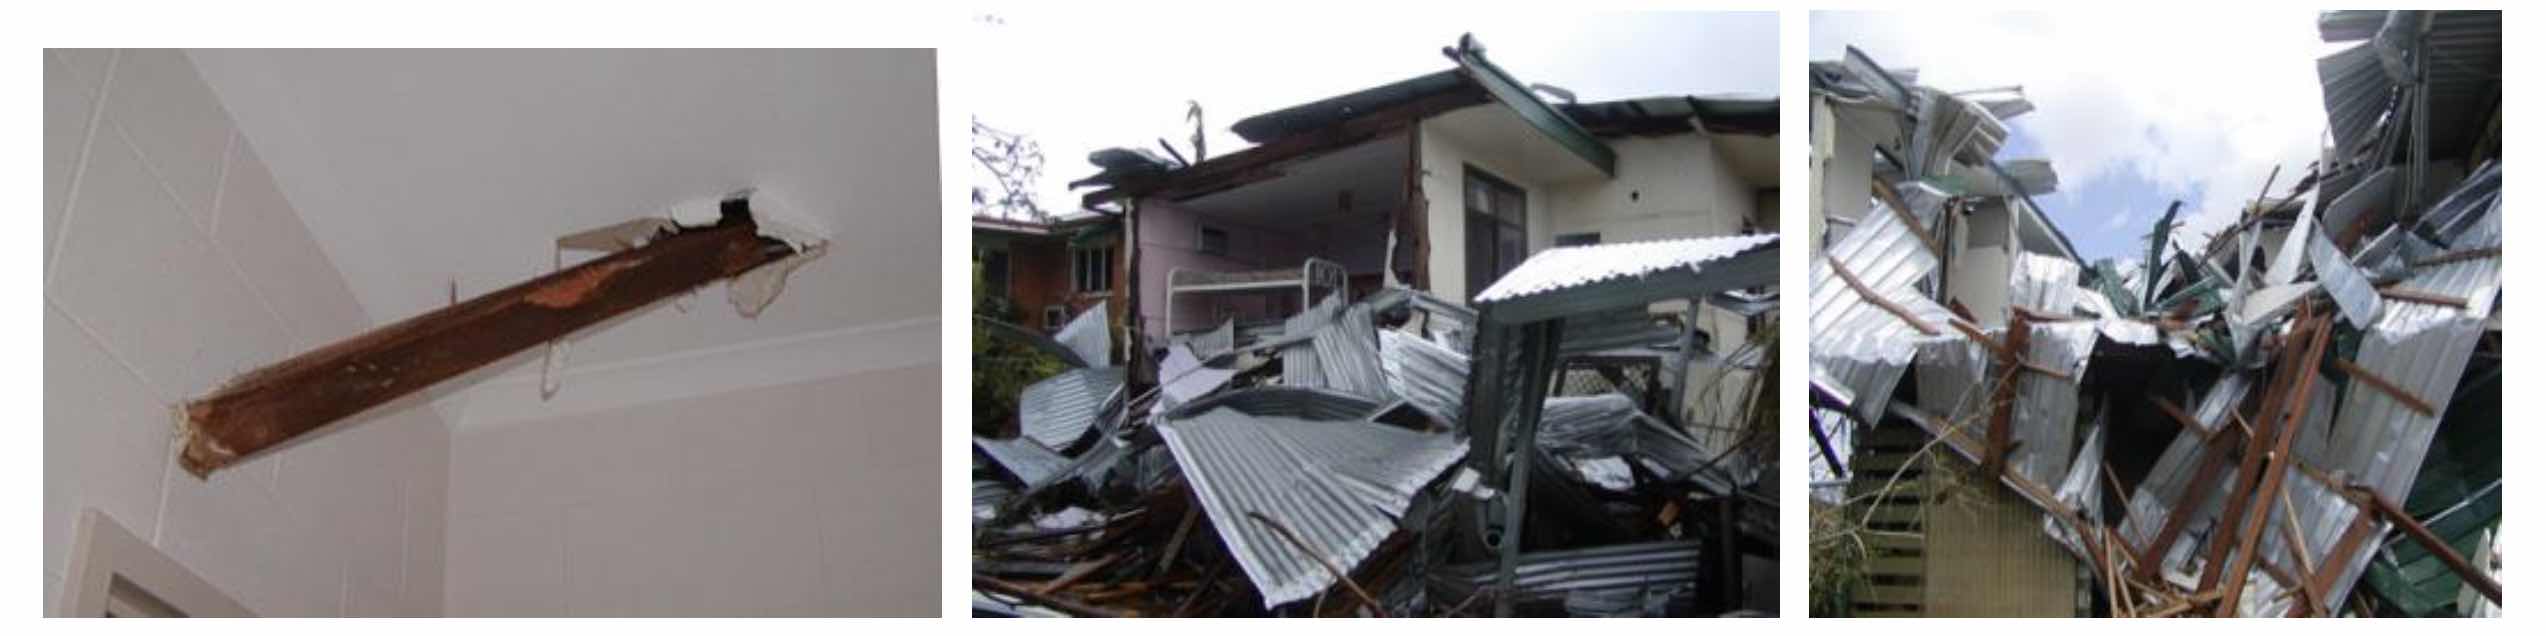 Houses damaged by wind-borne debris during TC Larry (Innisfail, Qld, 2006)